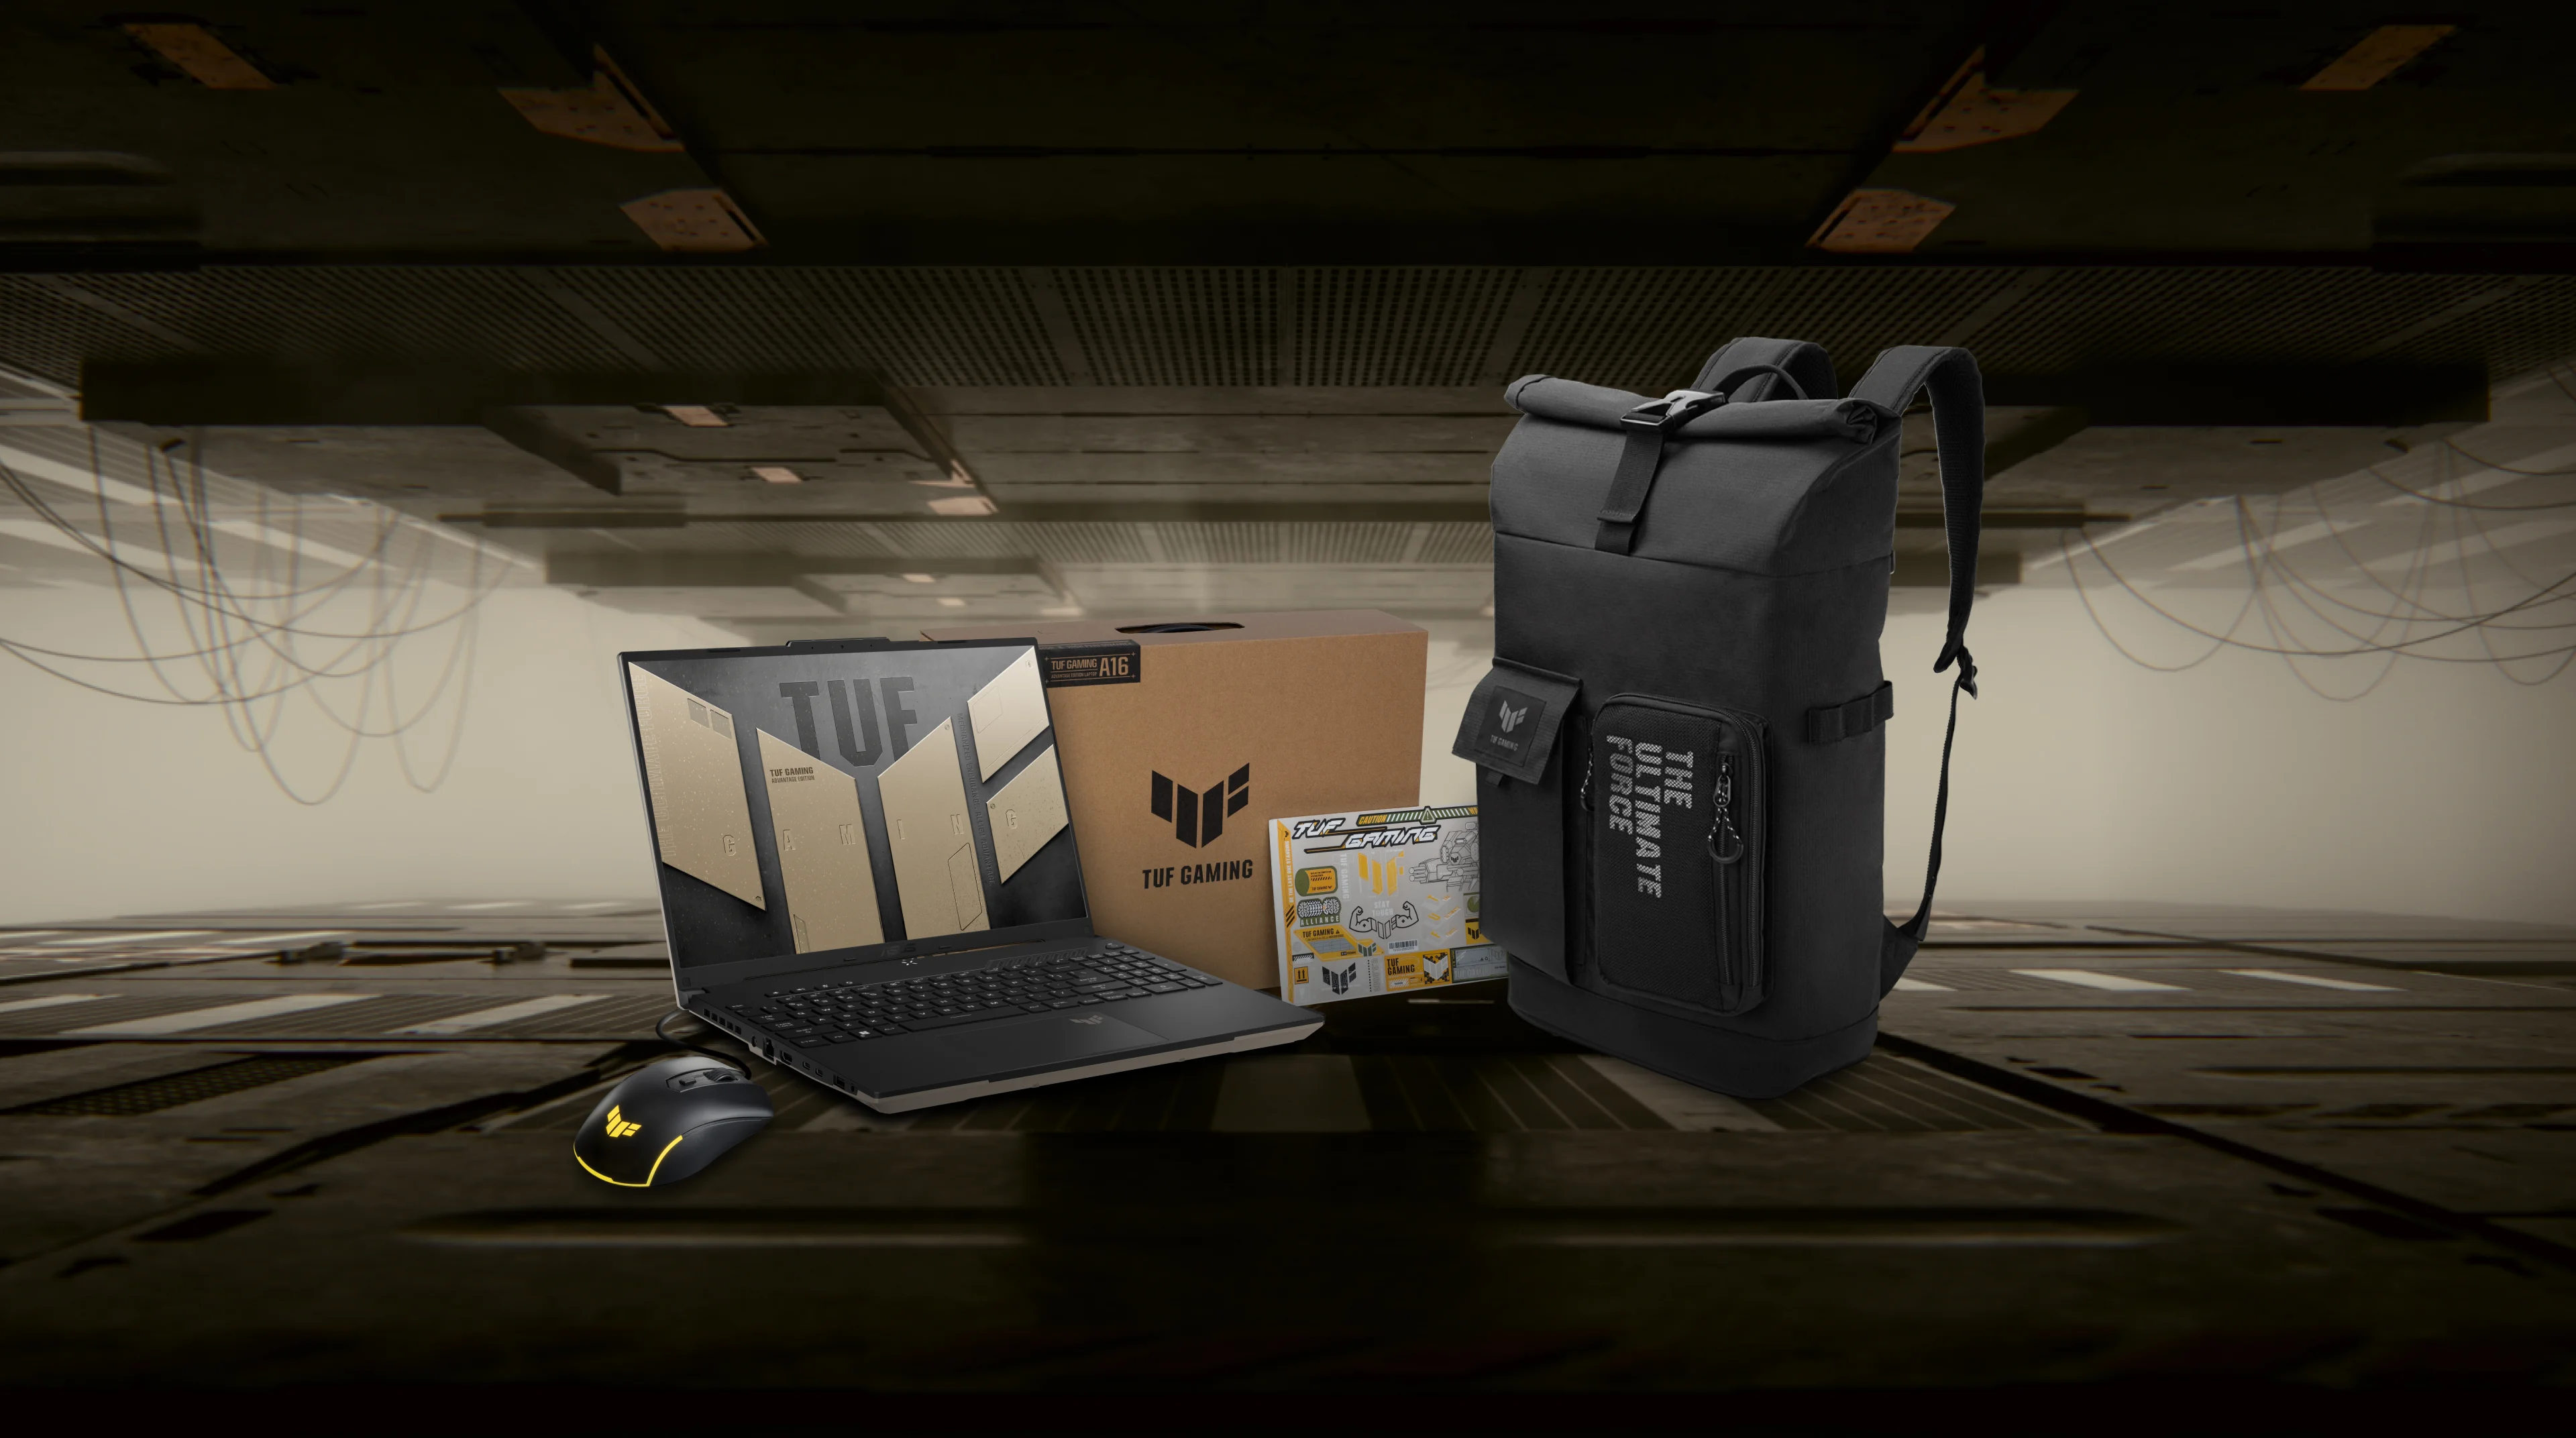 The TUF Gaming A16 laptop alongside the mouse, backpack, and box with a TUF sticker.